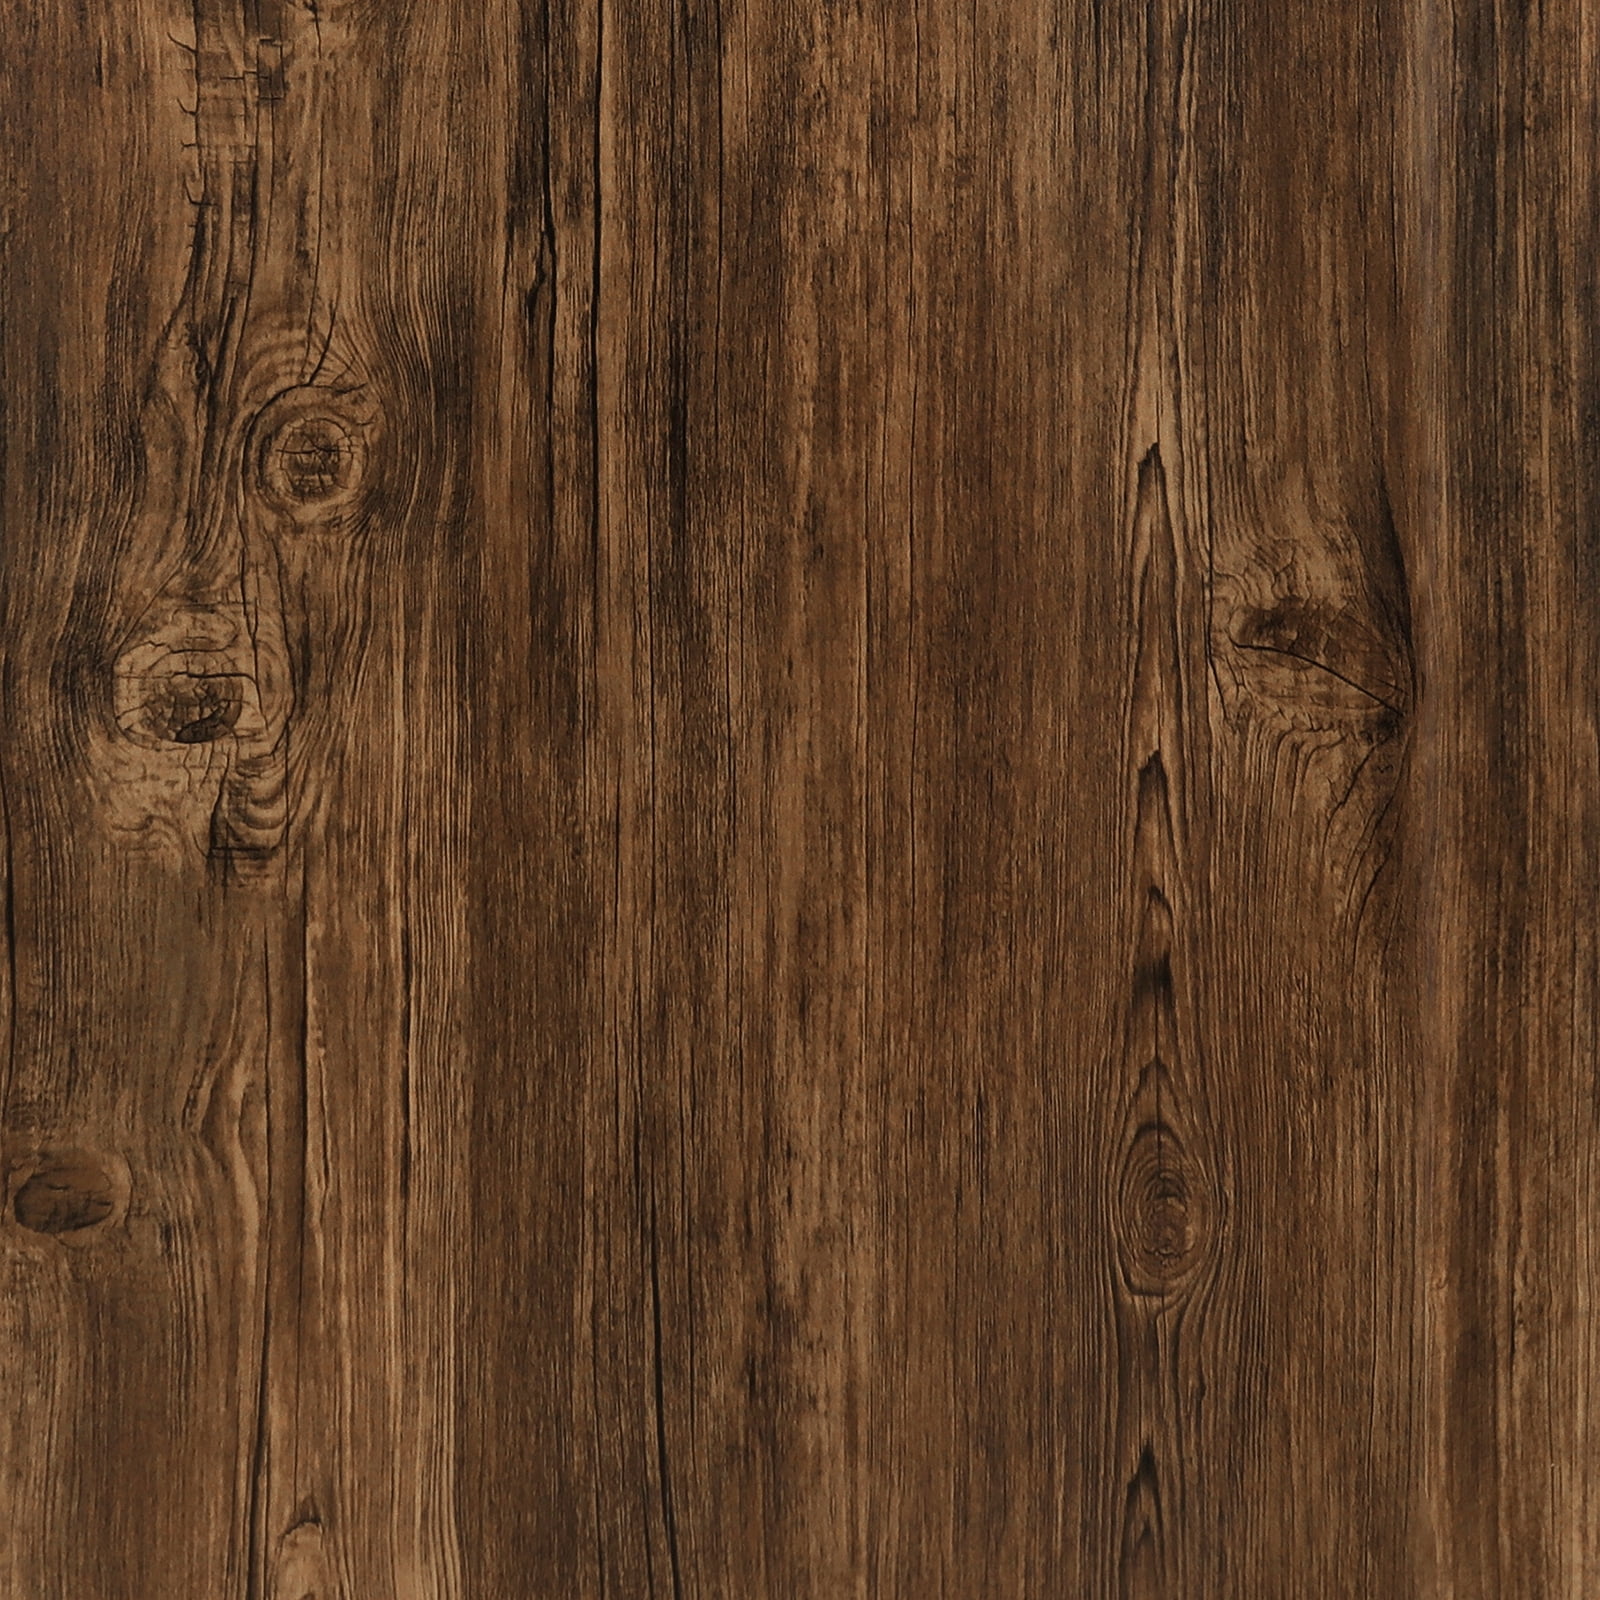 CRE8TIVE Brown Wood Wallpaper Peel and Stick 24